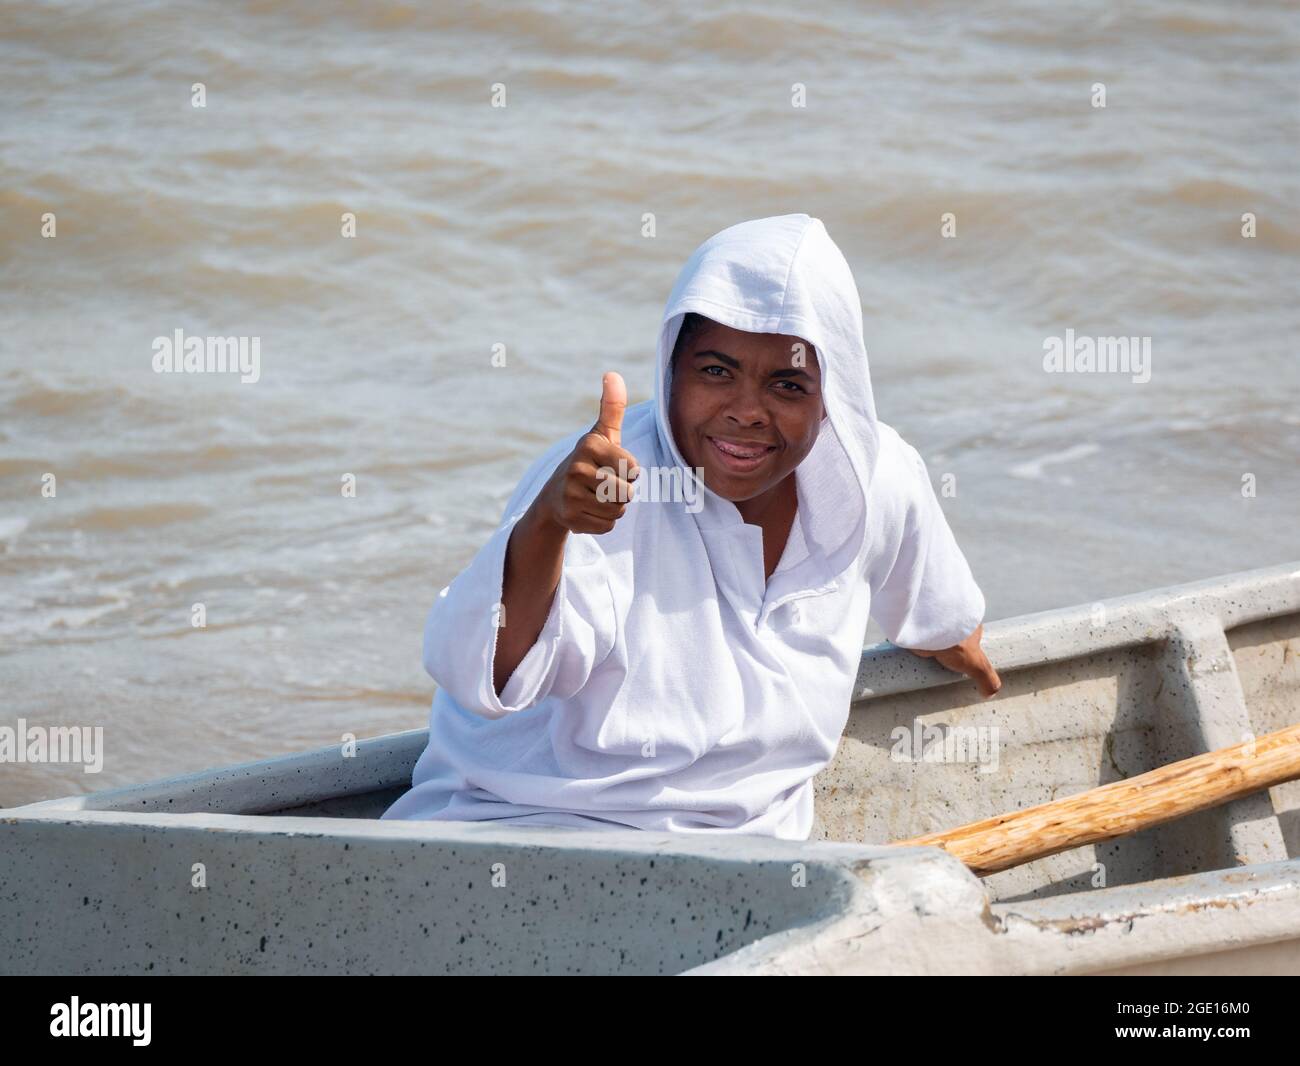 Riohacha, La Guajira, Colombia - May 30 2021: Young Black Latin Man Dressed in White Smiles at the Camera while Sitting on a Boat Stock Photo